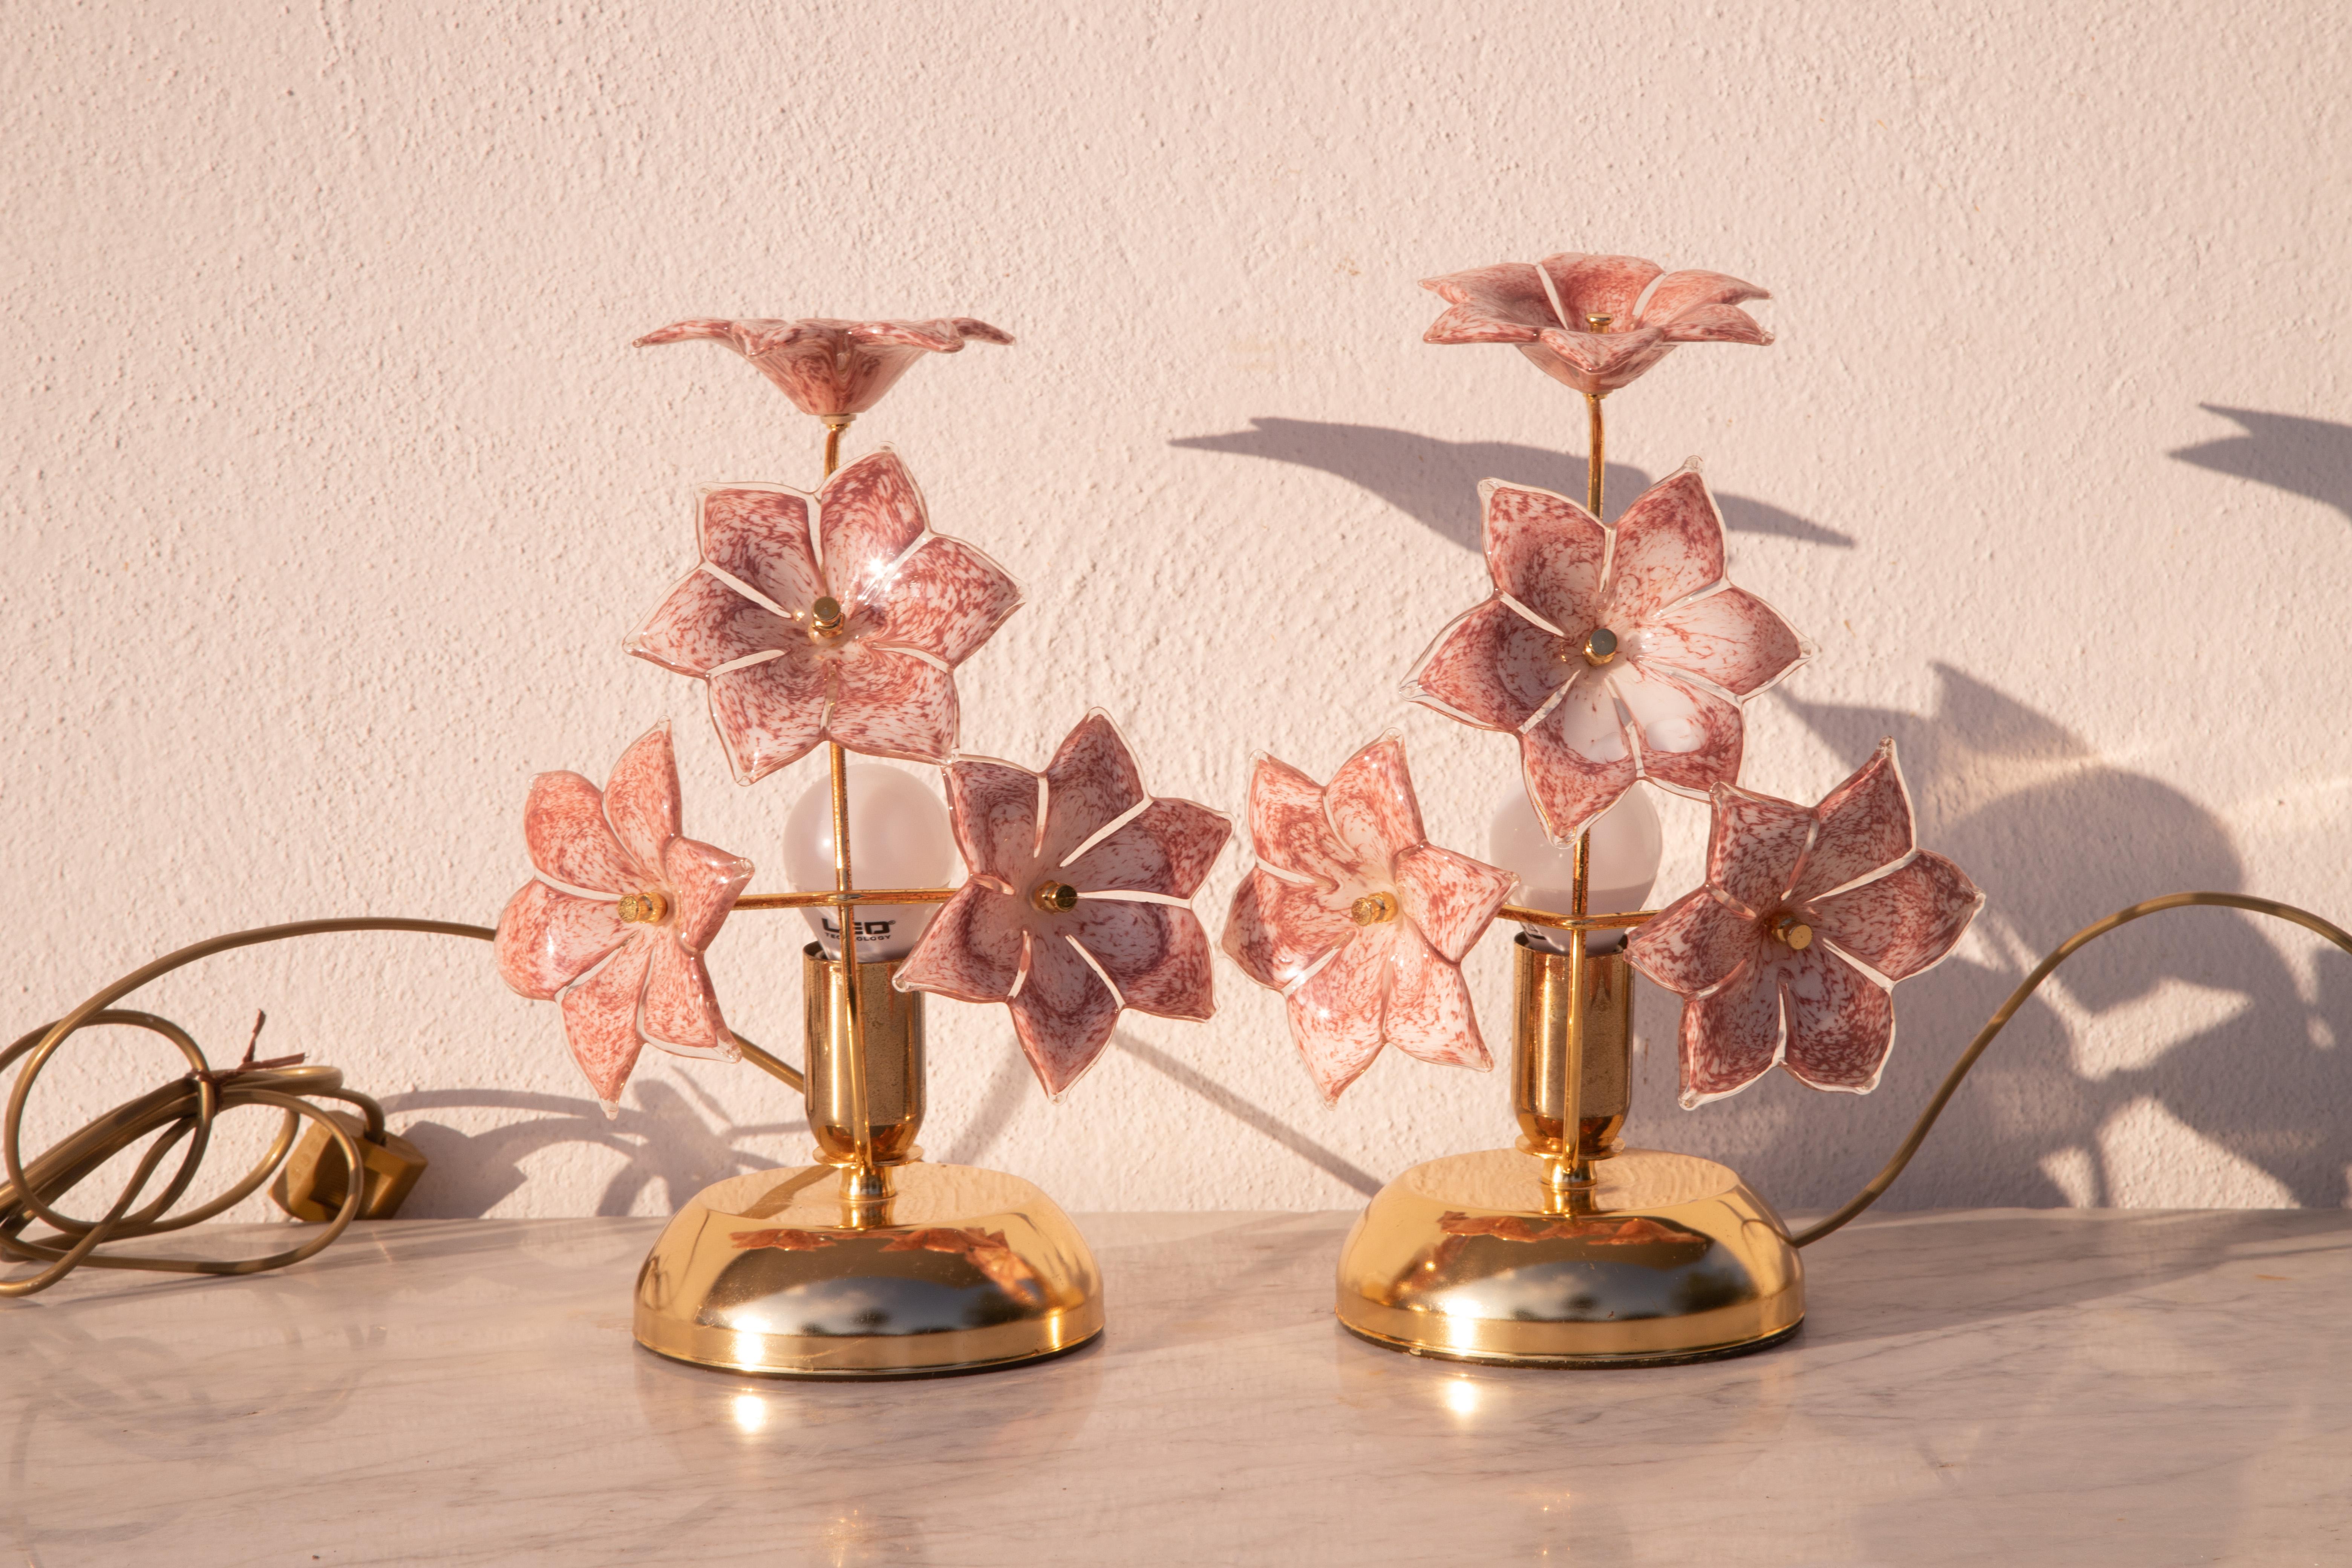 Pair of abatjour table lamps decorated with pink flowers in Murano glass.
Excellent vintage condition.
Each lamp mounts an e14 socket, possibility of wiring for Usa.
Height 30 centimeters, diameter 20 centimeters.